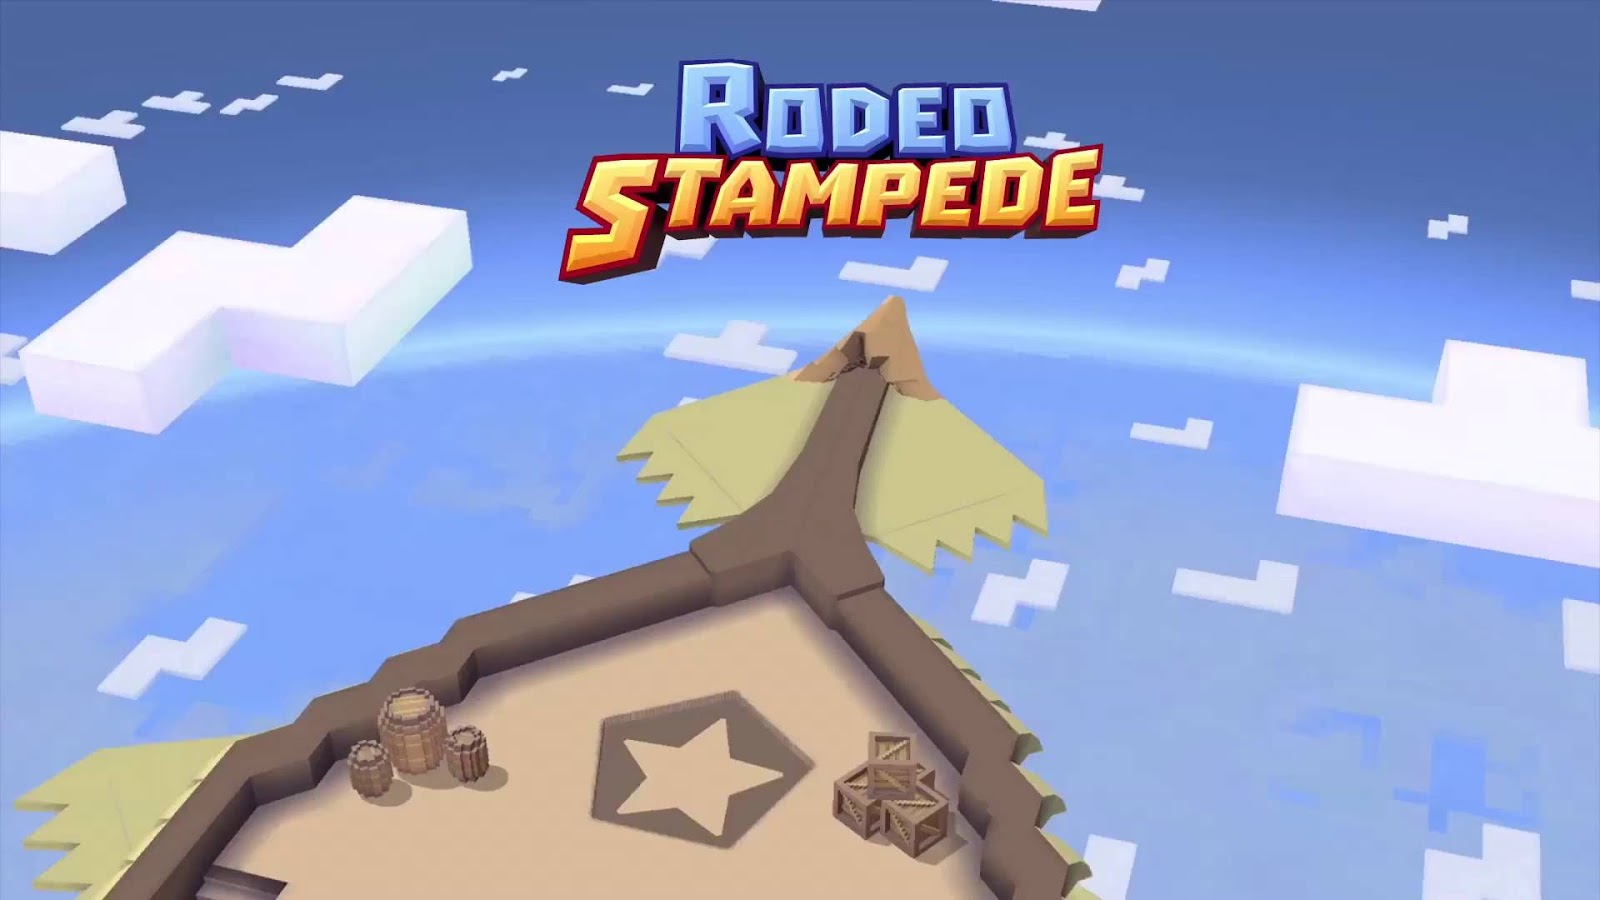 Rodeo Stampede: Sky Zoo Safari Gets Halloween Themed Makeover